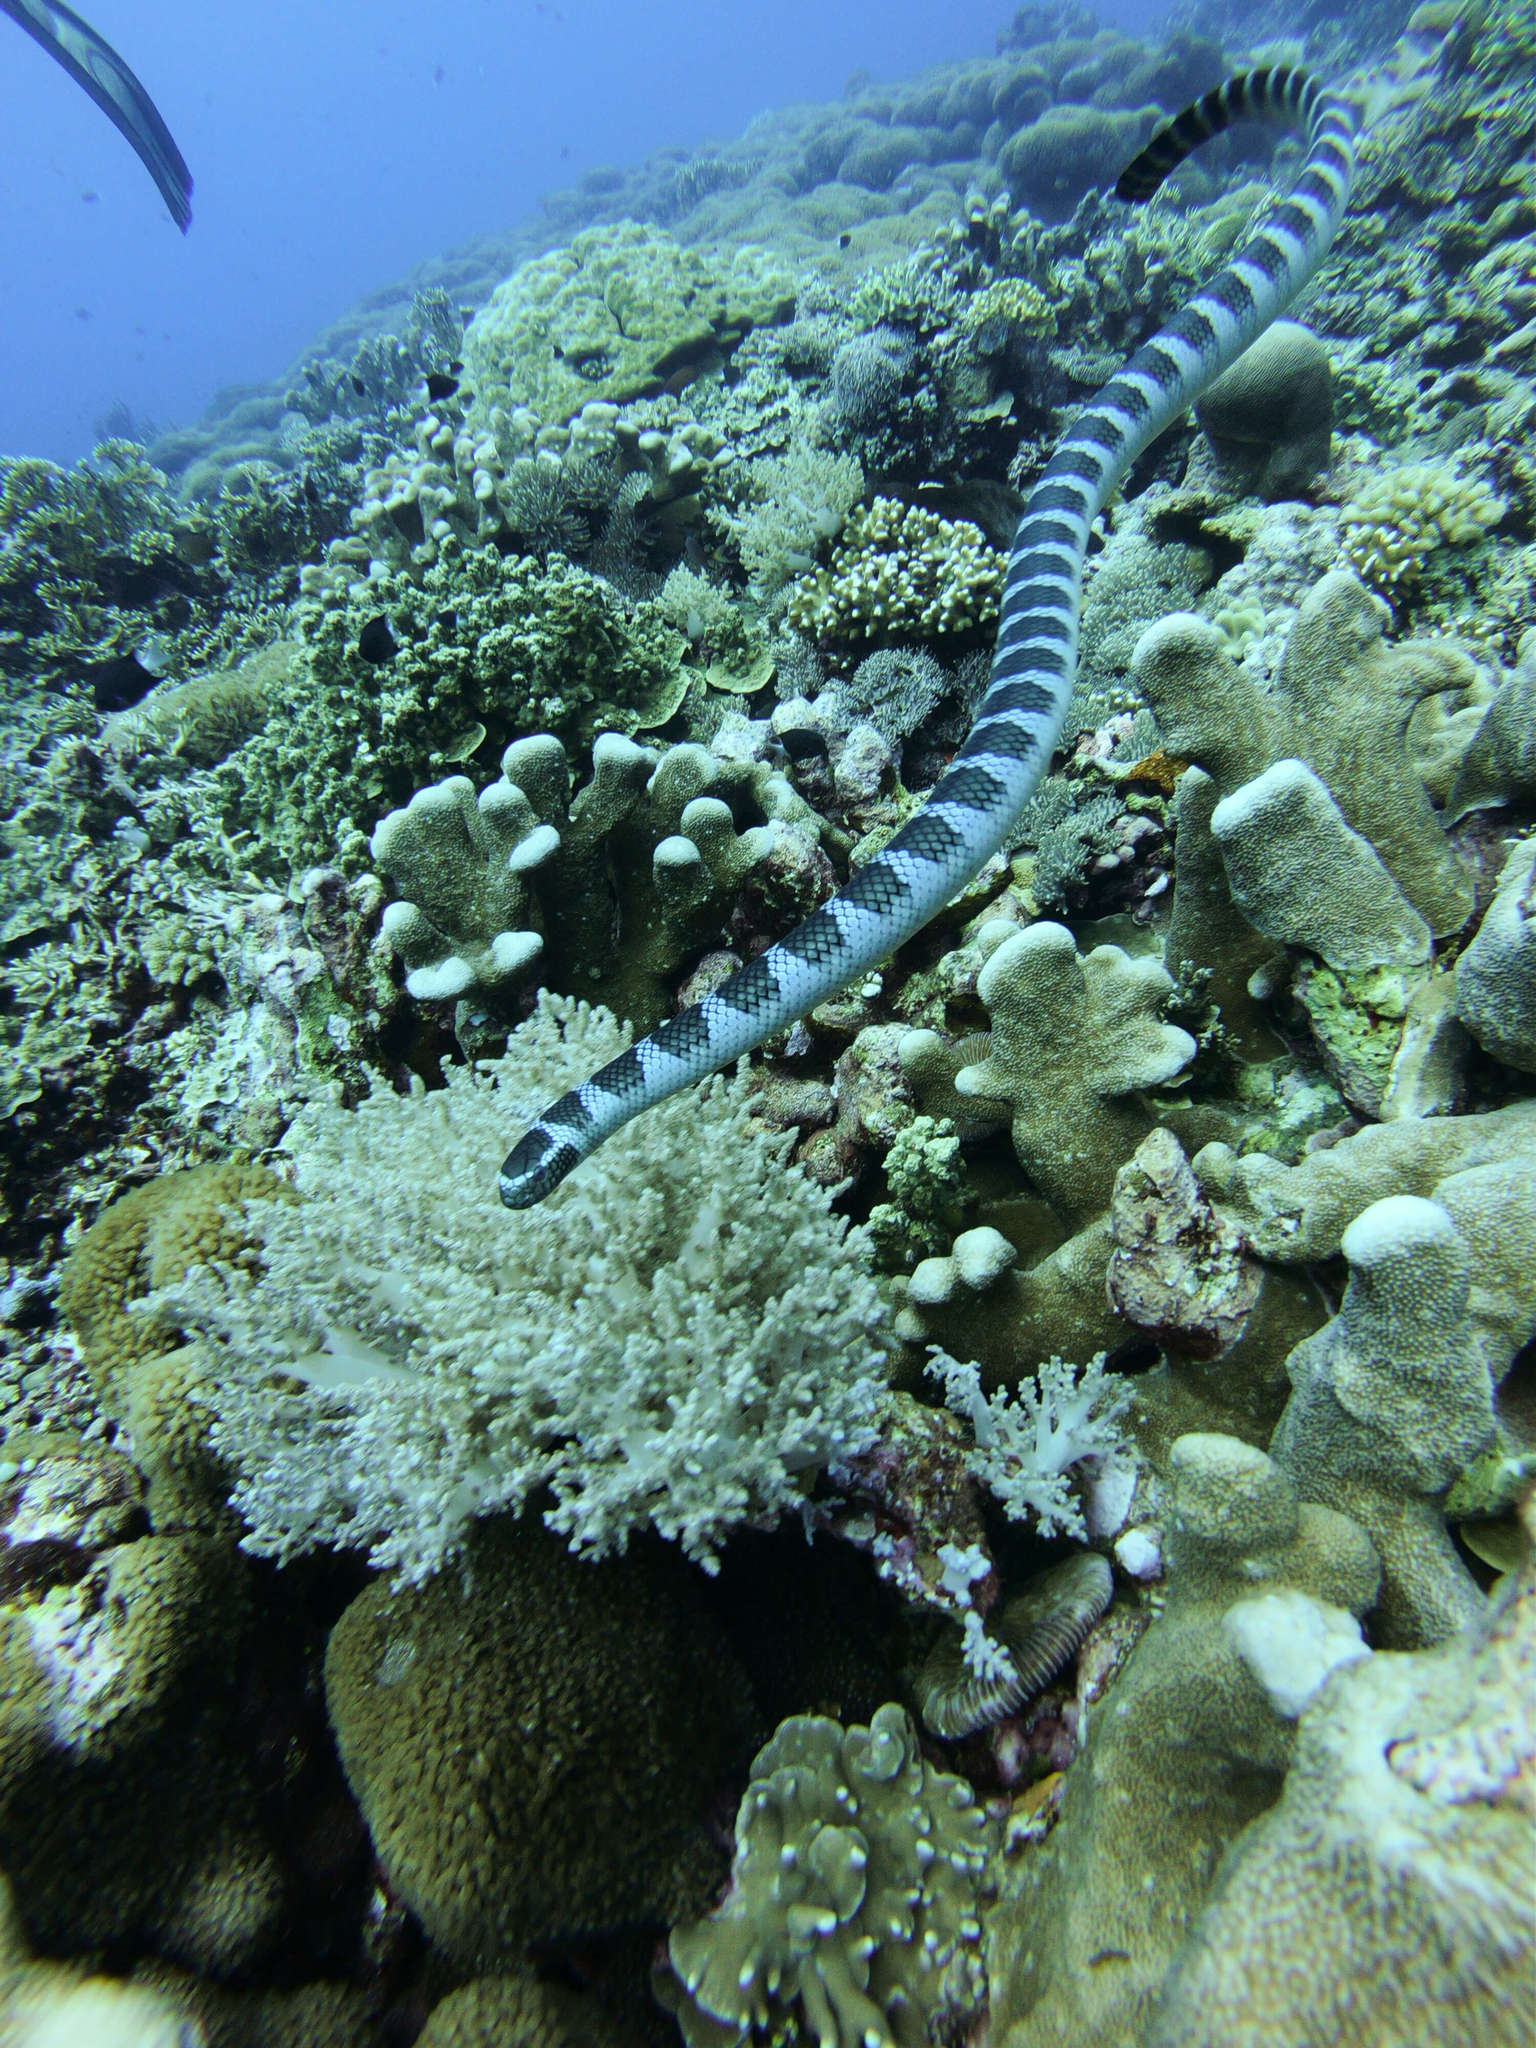 Manuk Island Diving with Snakes